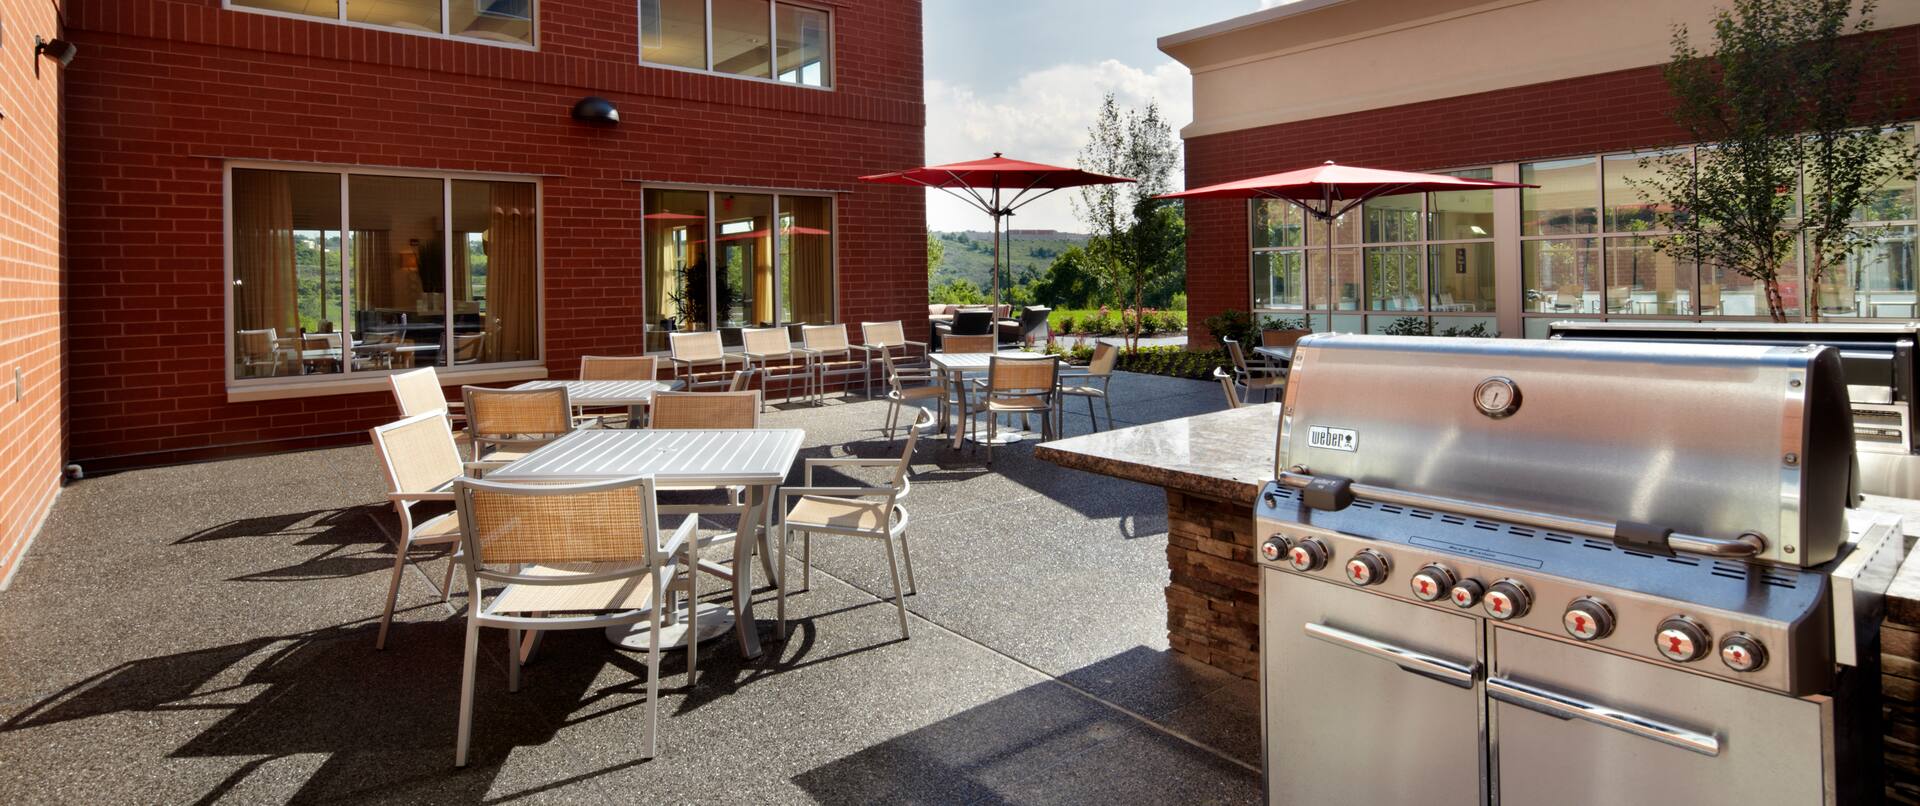 Outdoor Patio area with BBQ gril and dining tables with umbrellas